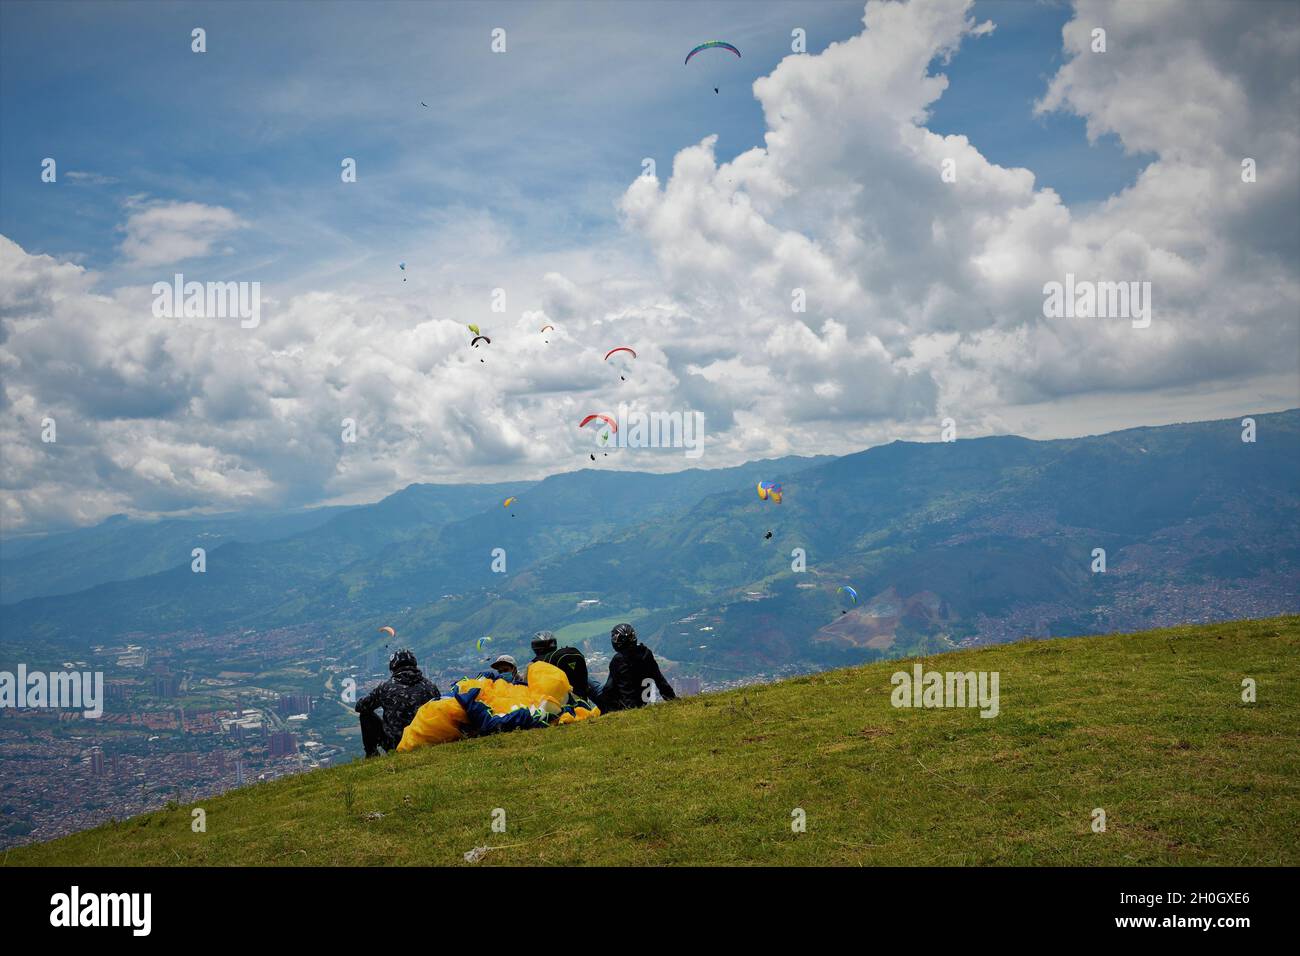 People sitting on the hill and looking at Medellin Paragliding in San Felix, Colombia Stock Photo